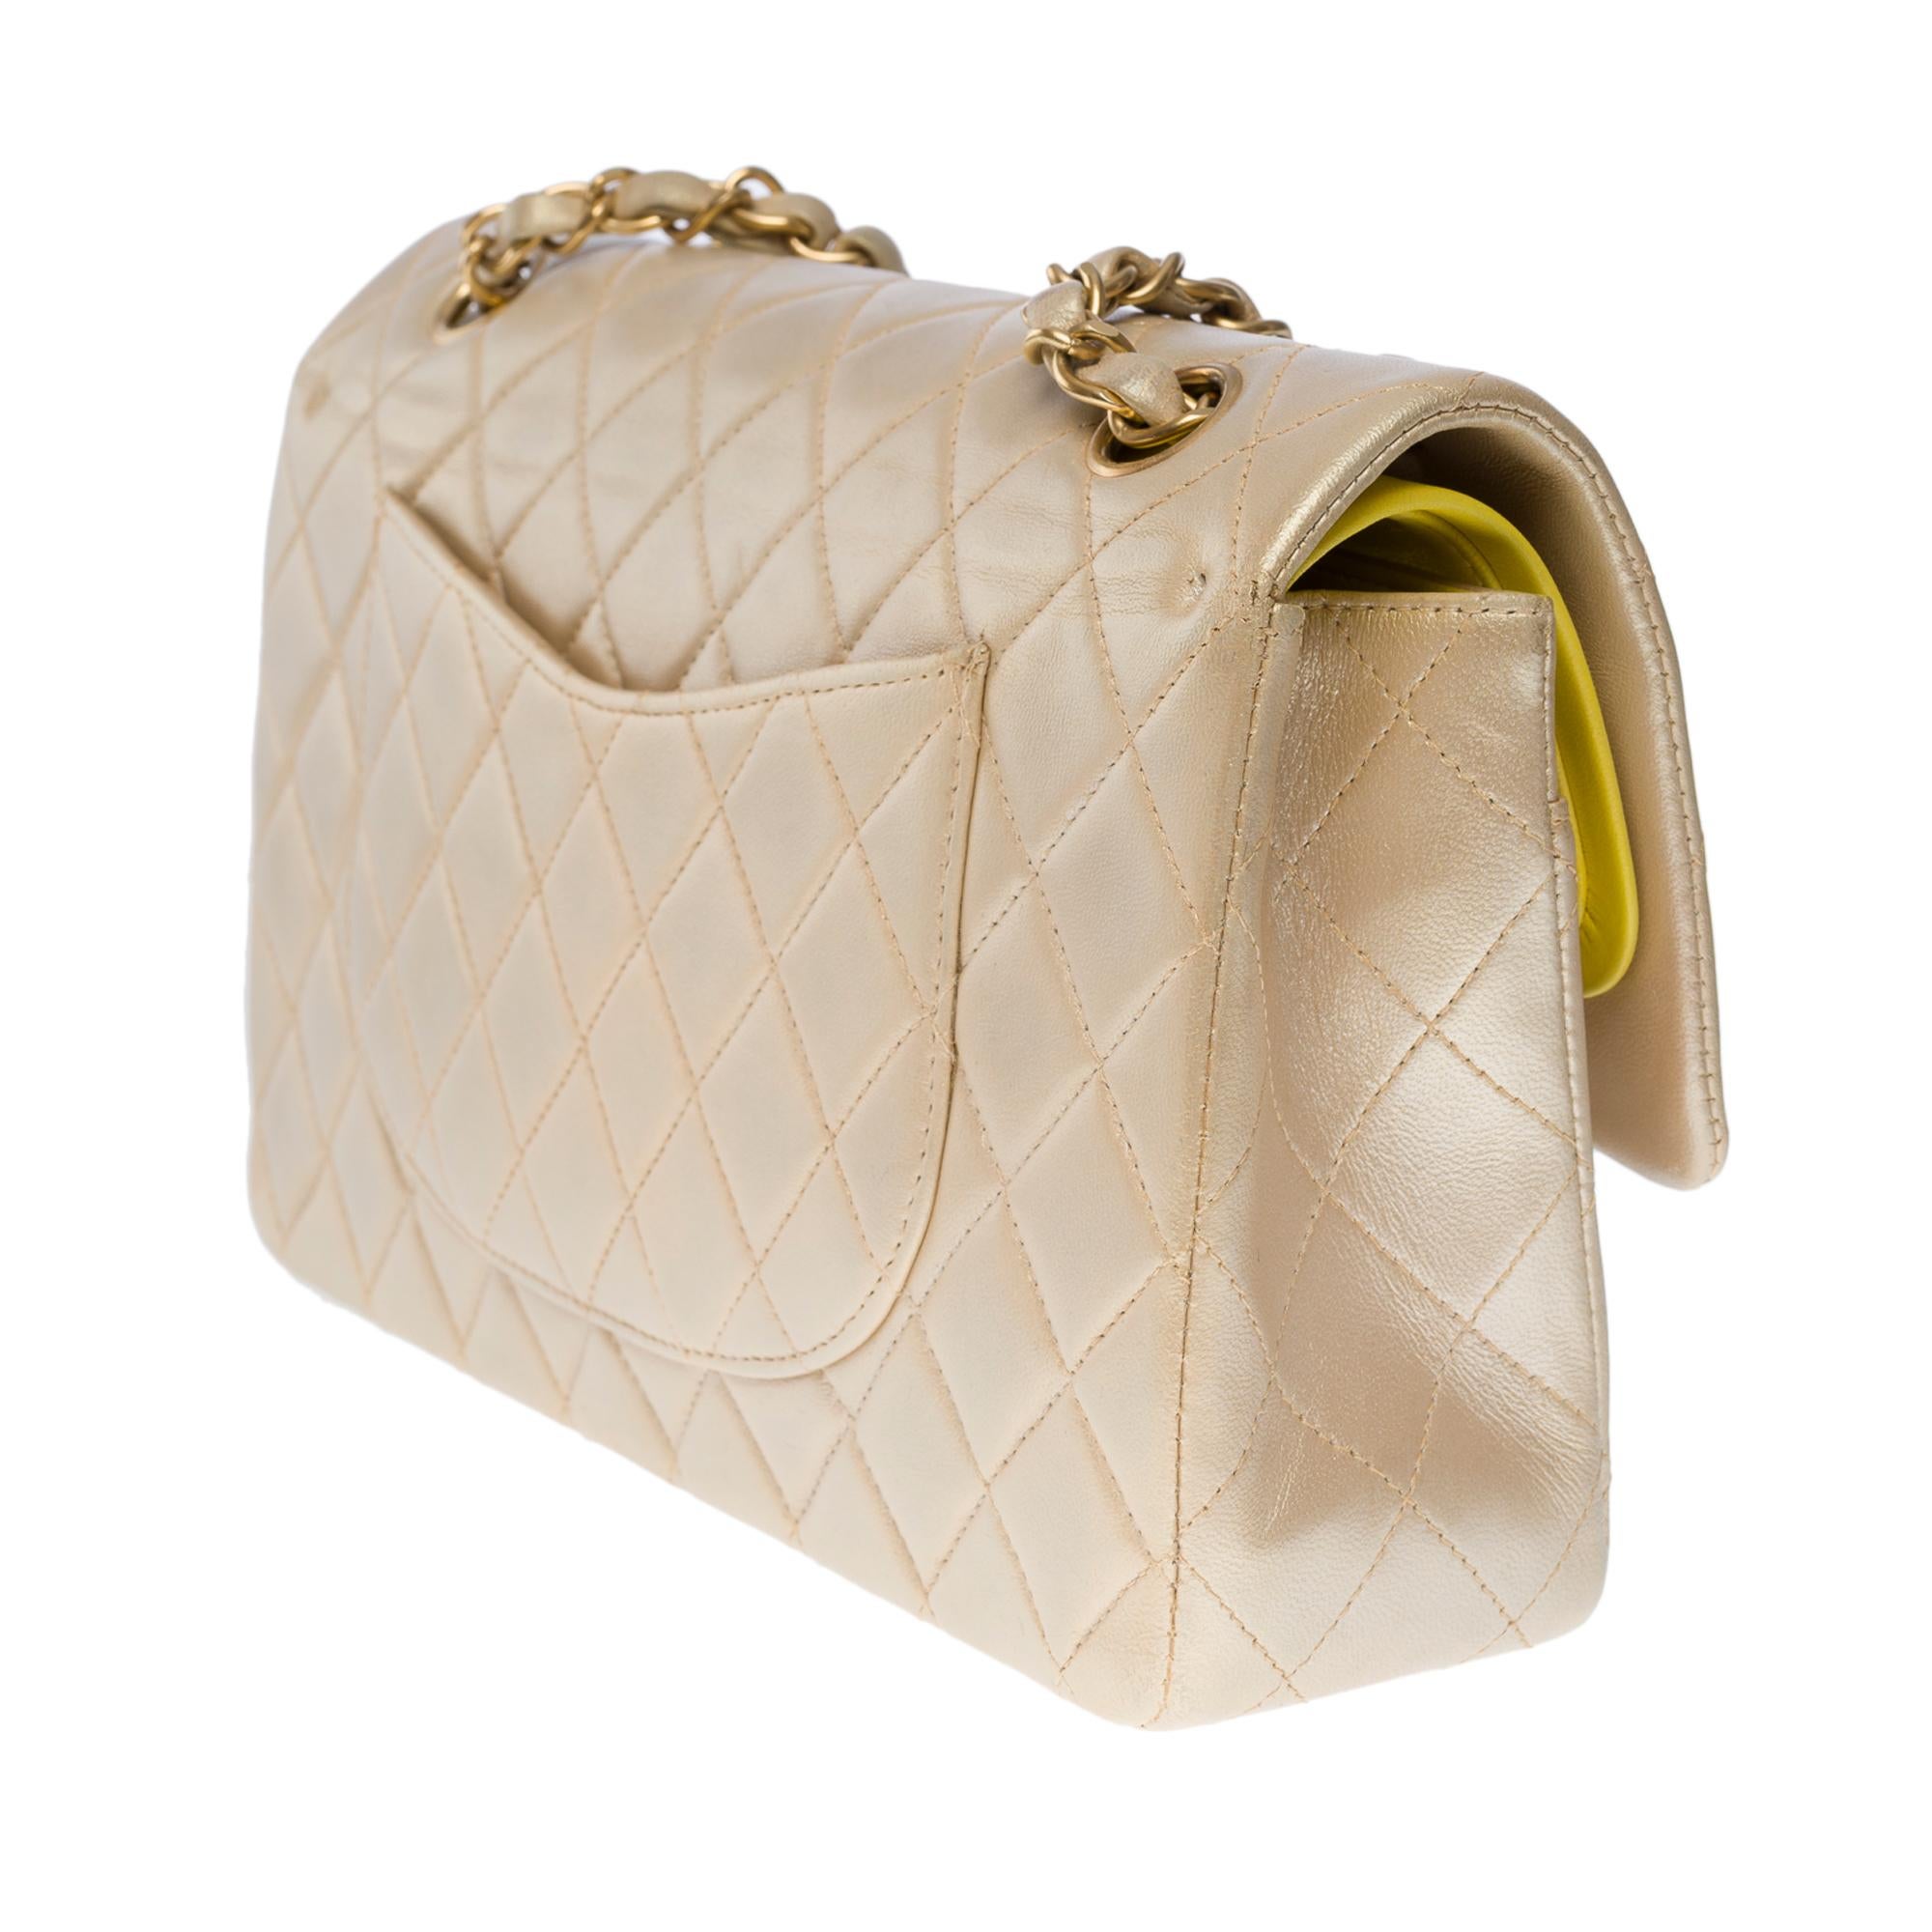 Chanel Timeless Medium double flap bag in iridescent gold quilted lambskin , GHW 1